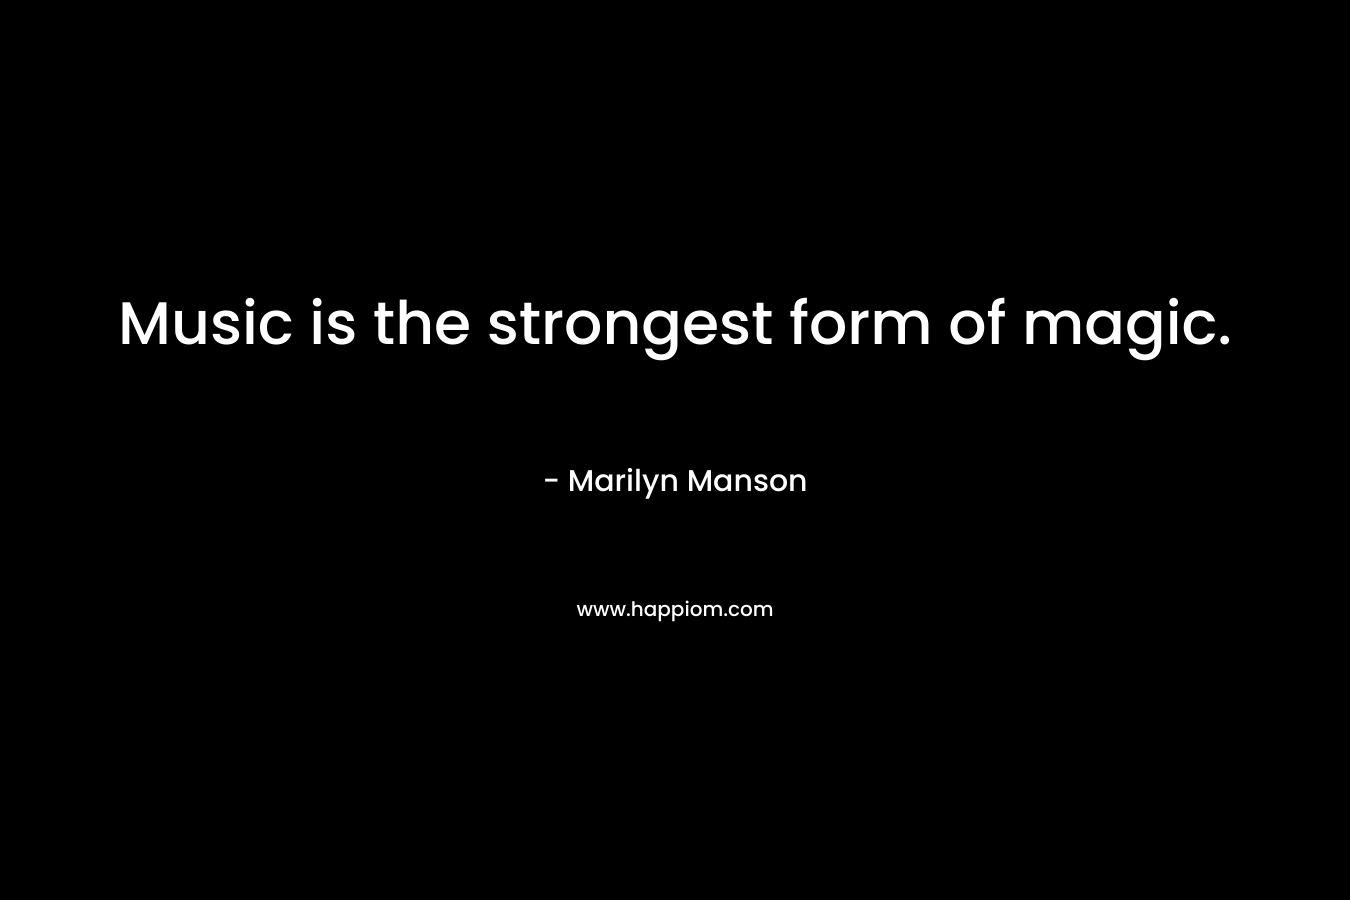 Music is the strongest form of magic. – Marilyn Manson